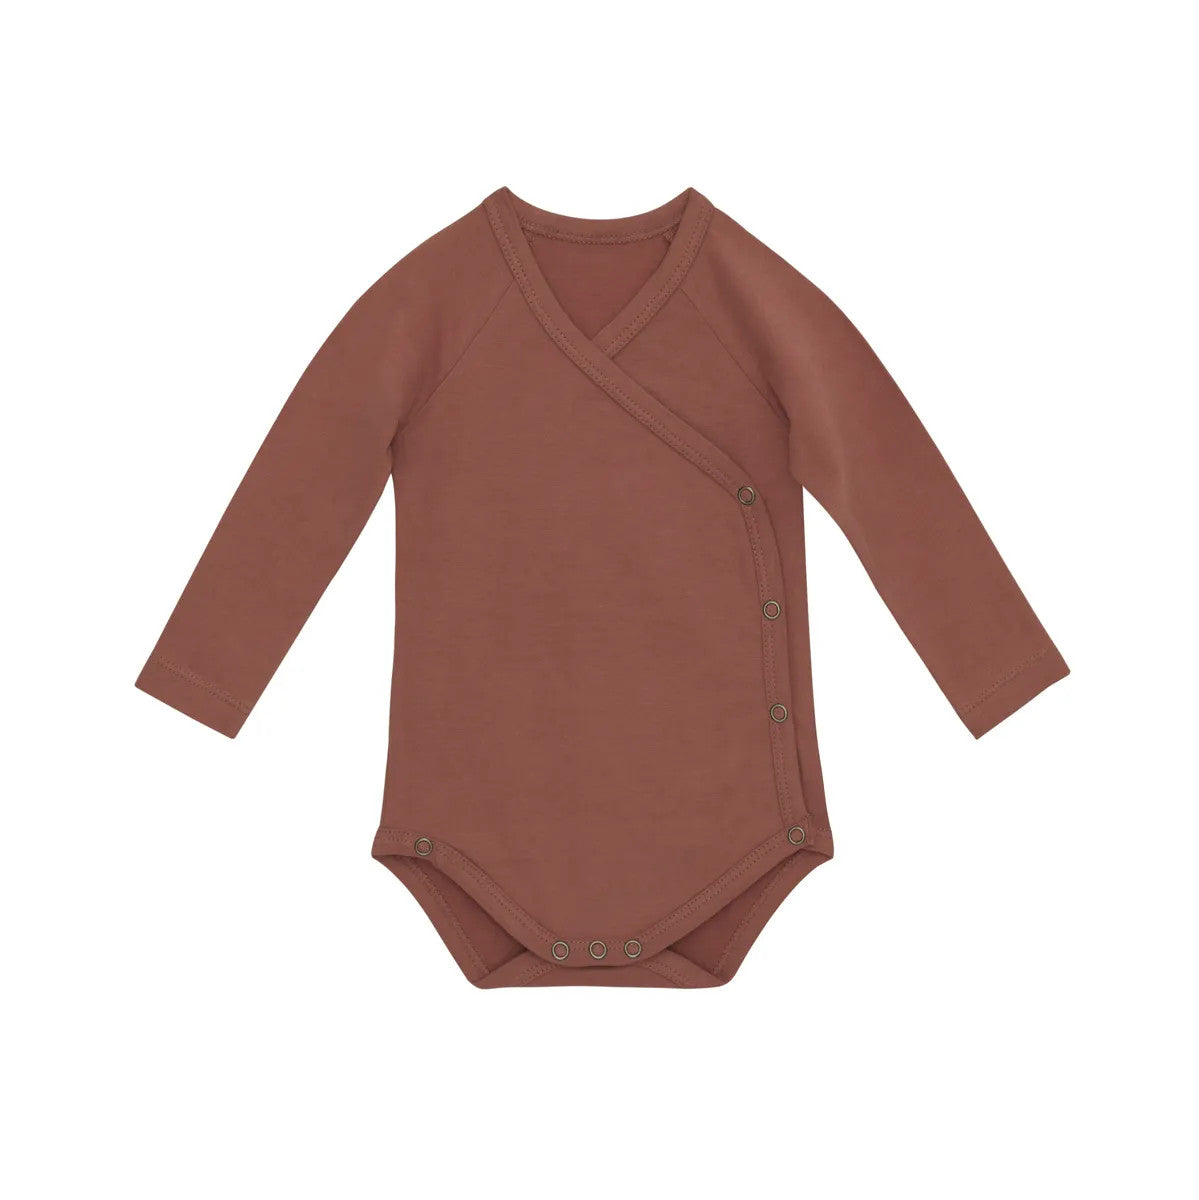 Little Hedonist unisex organic cotton baby onesie (body / romper) made from our signature organic cotton in rust color.